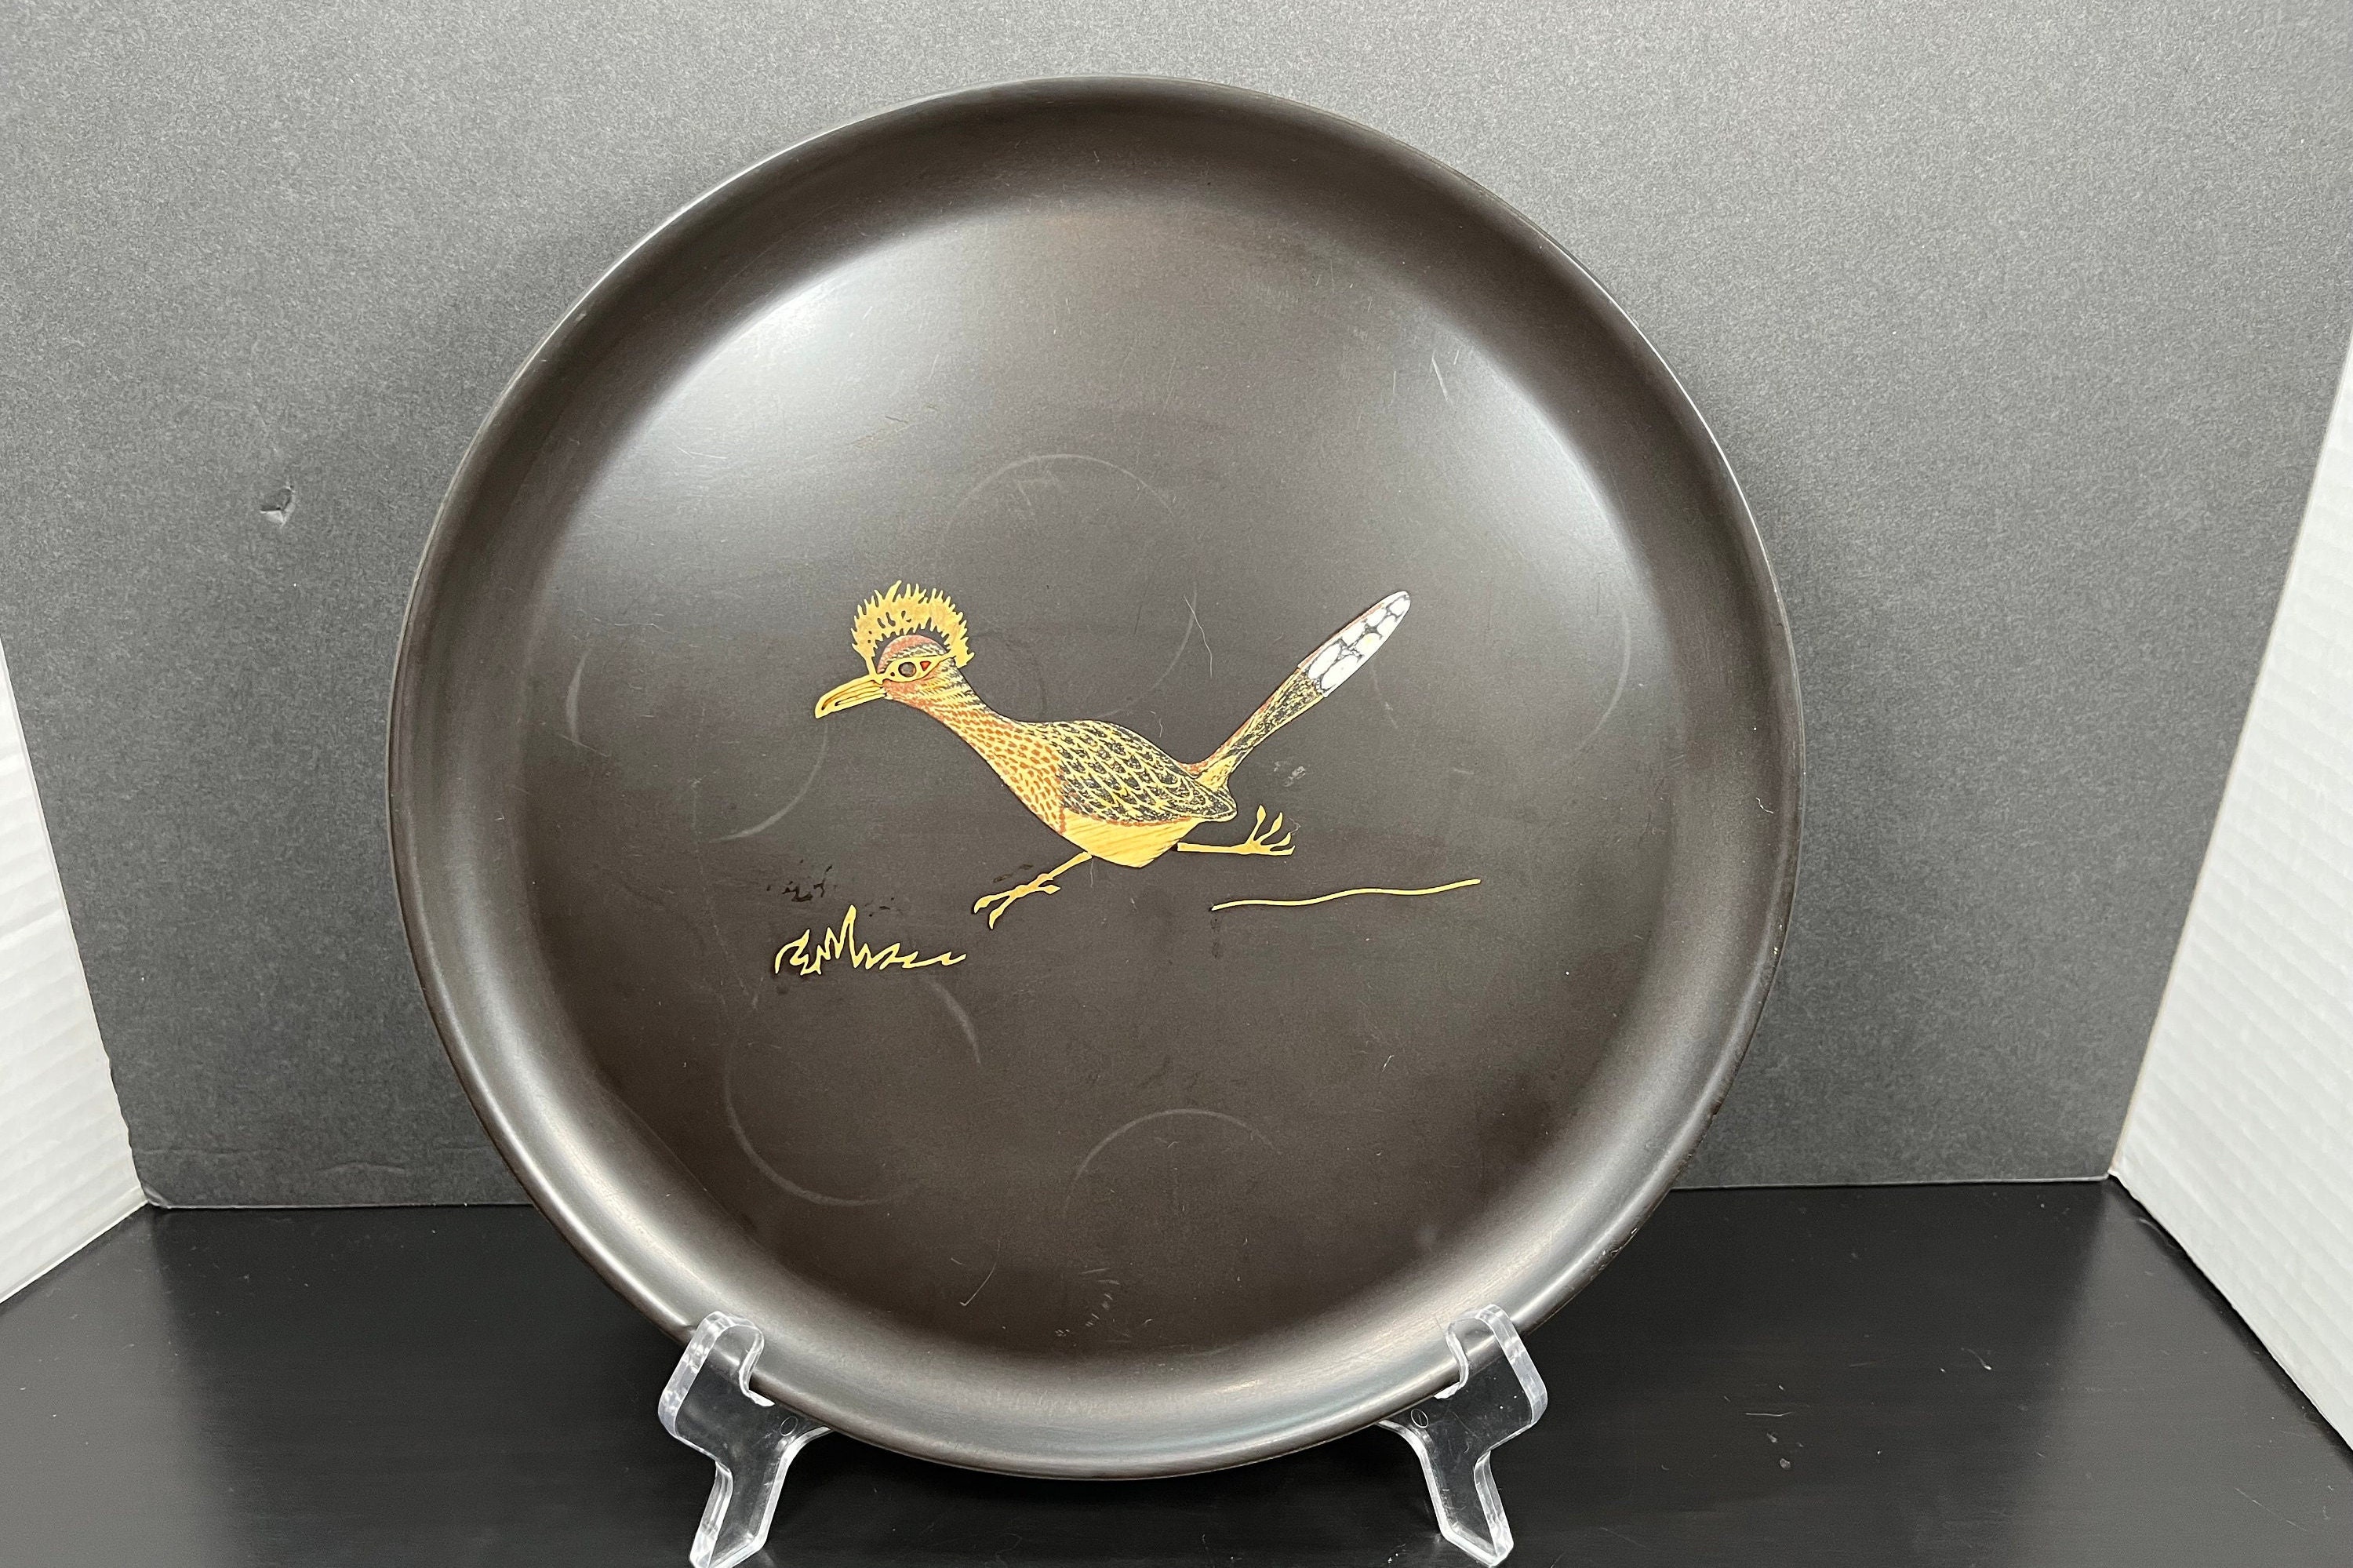 Couroc of Monterey Vintage Black Tray Red Cardinal-gold Pine Bough Art/tray  